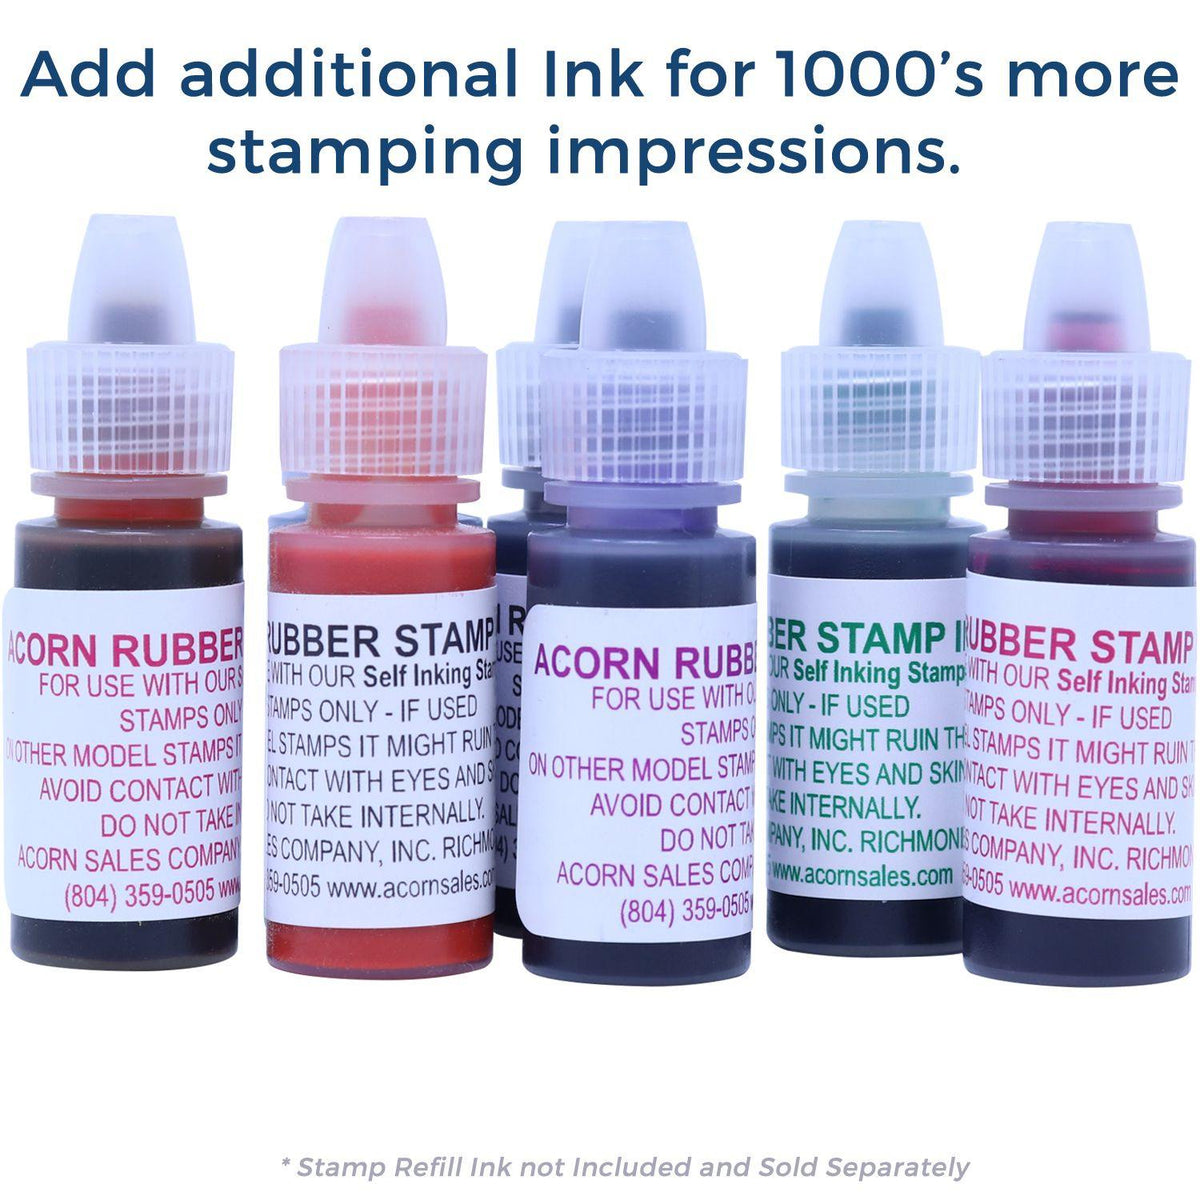 Refill Inks for Large Pre-Inked Archivado Stamp Available